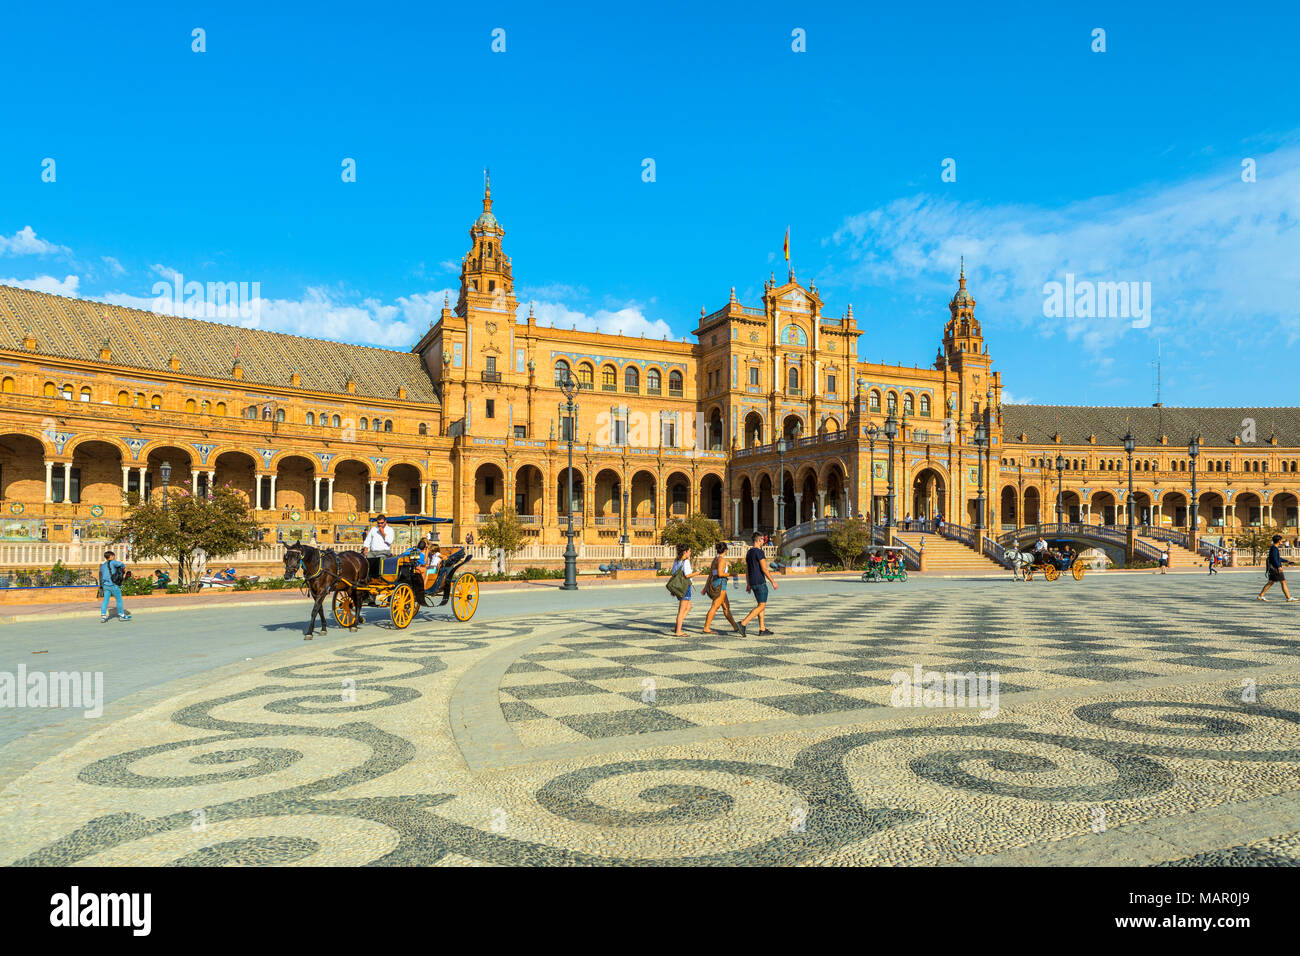 Horse-drawn carriage, Plaza de Espana, built for the Ibero-American Exposition of 1929, Seville, Andalucia, Spain, Europe Stock Photo